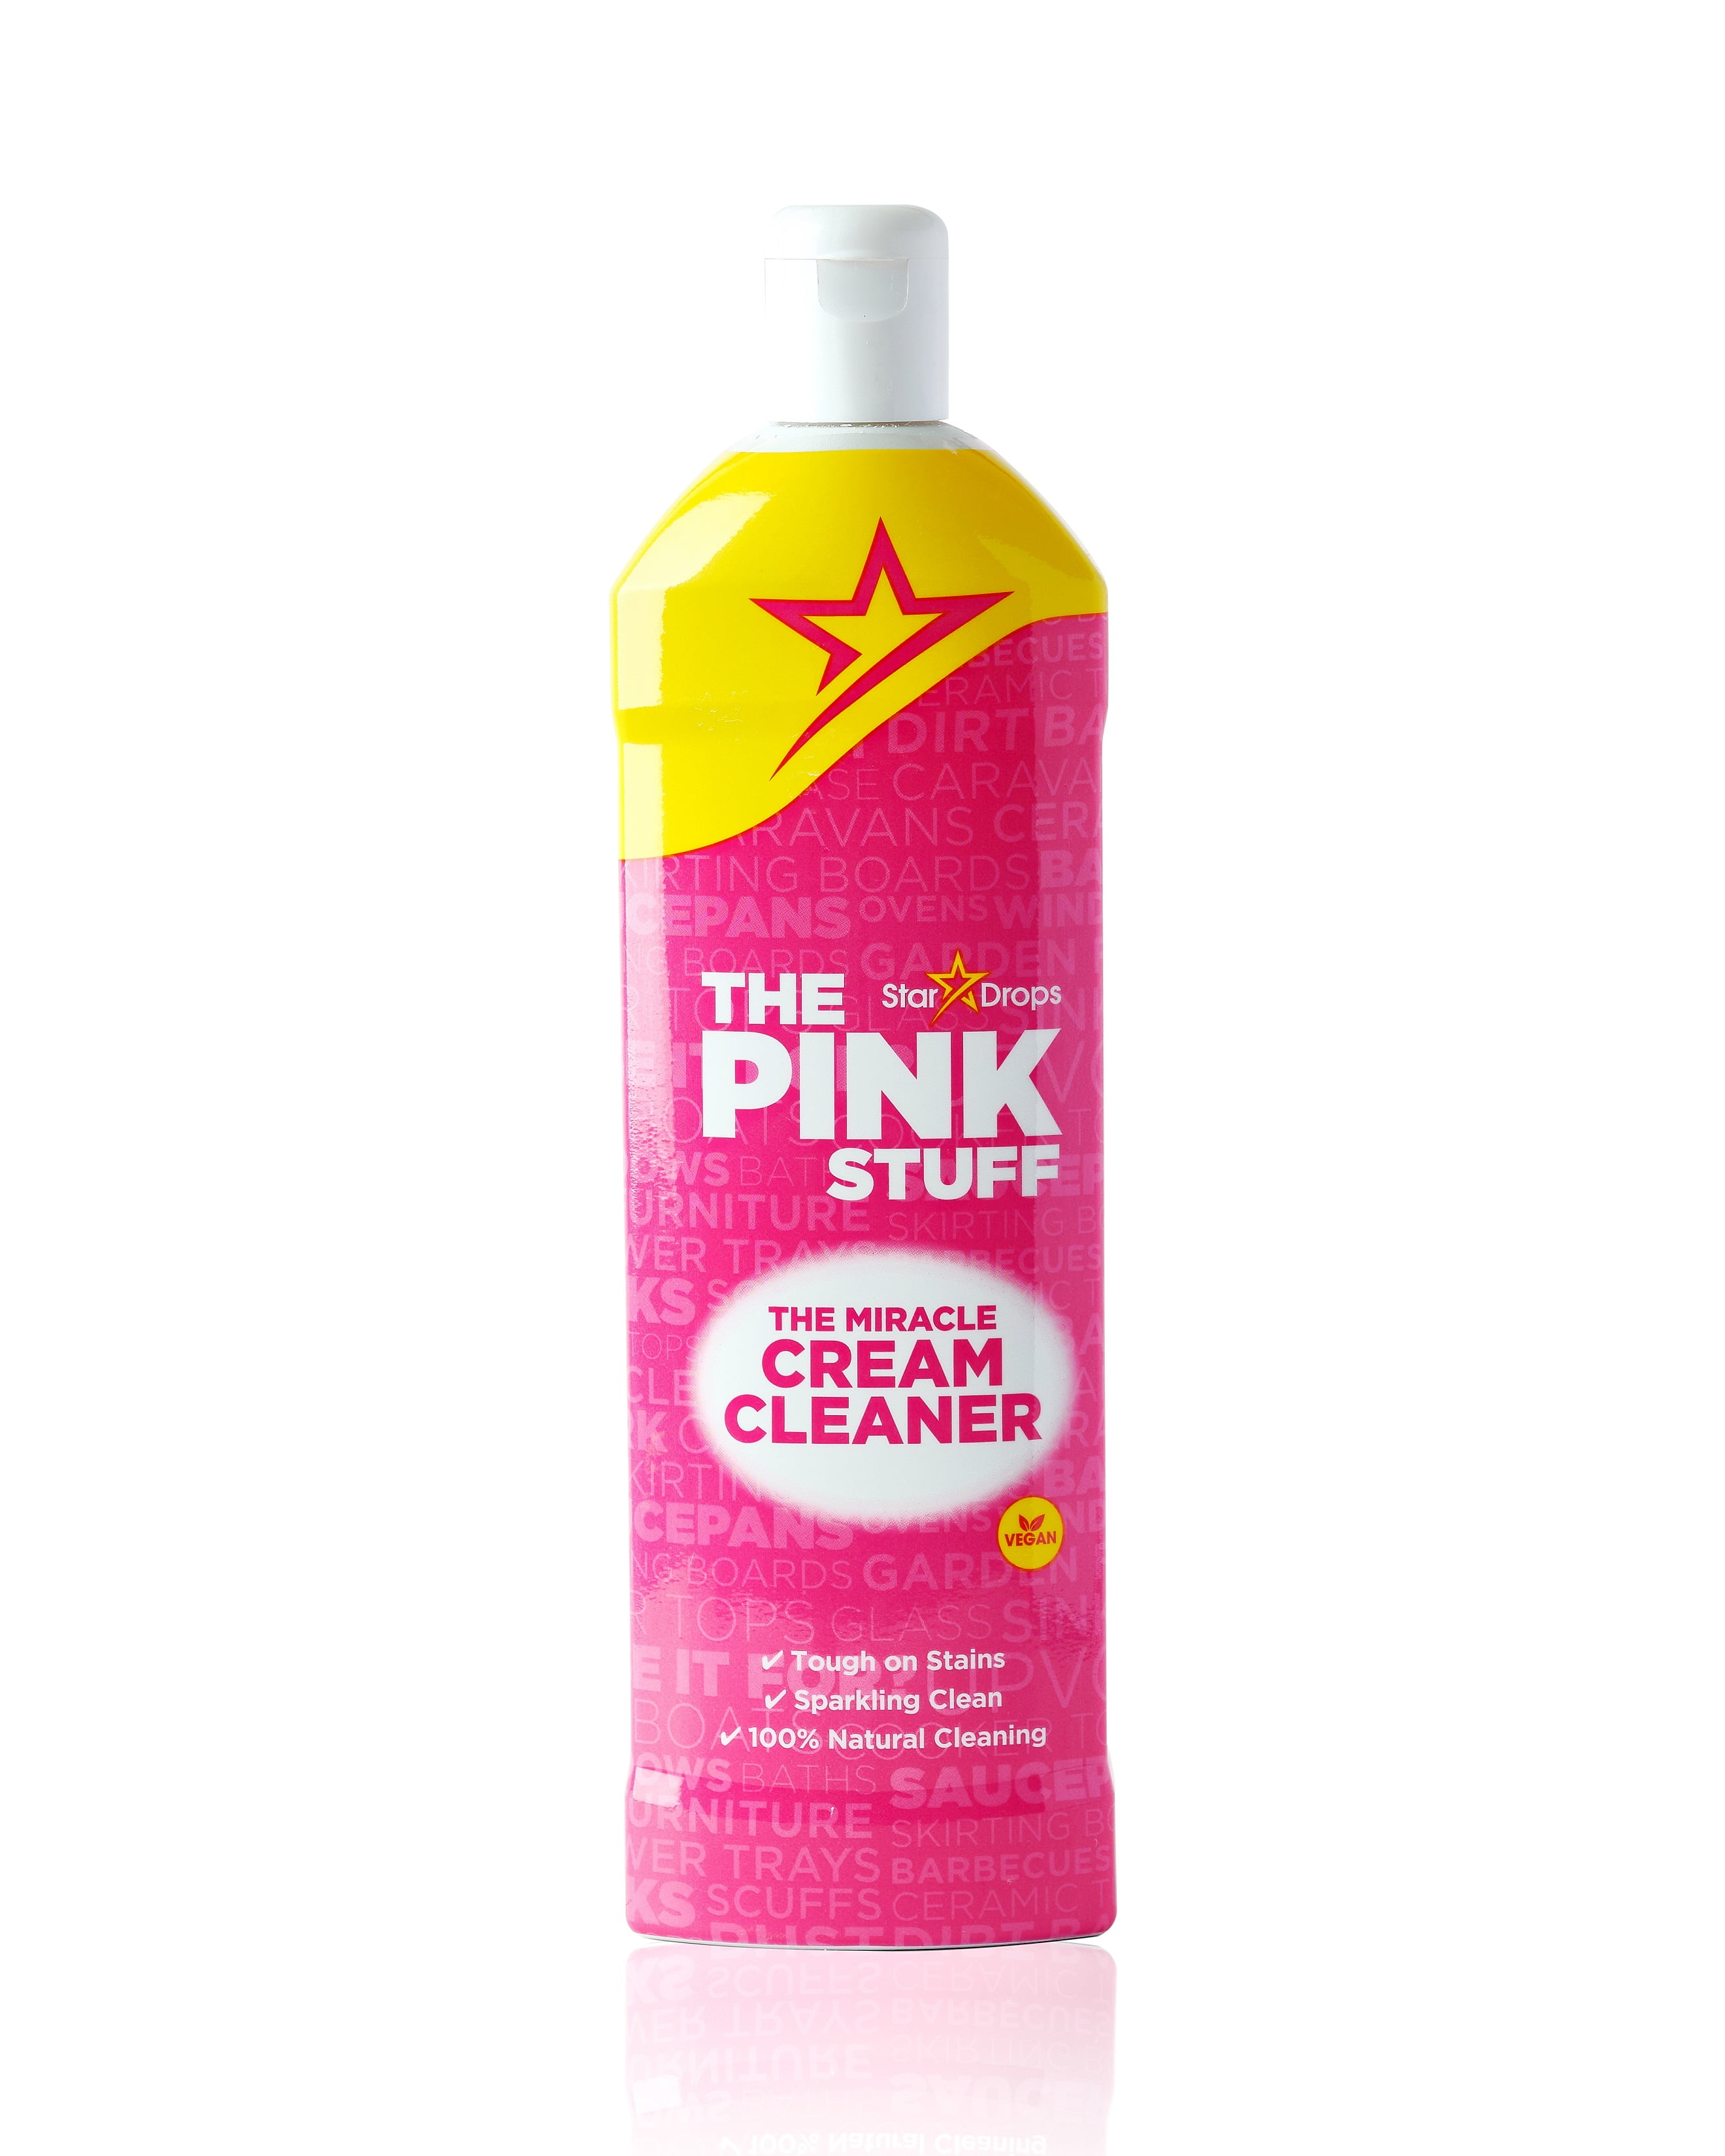 The Pink Stuff, Miracle Cream Cleaner, 17.6 fl. oz.